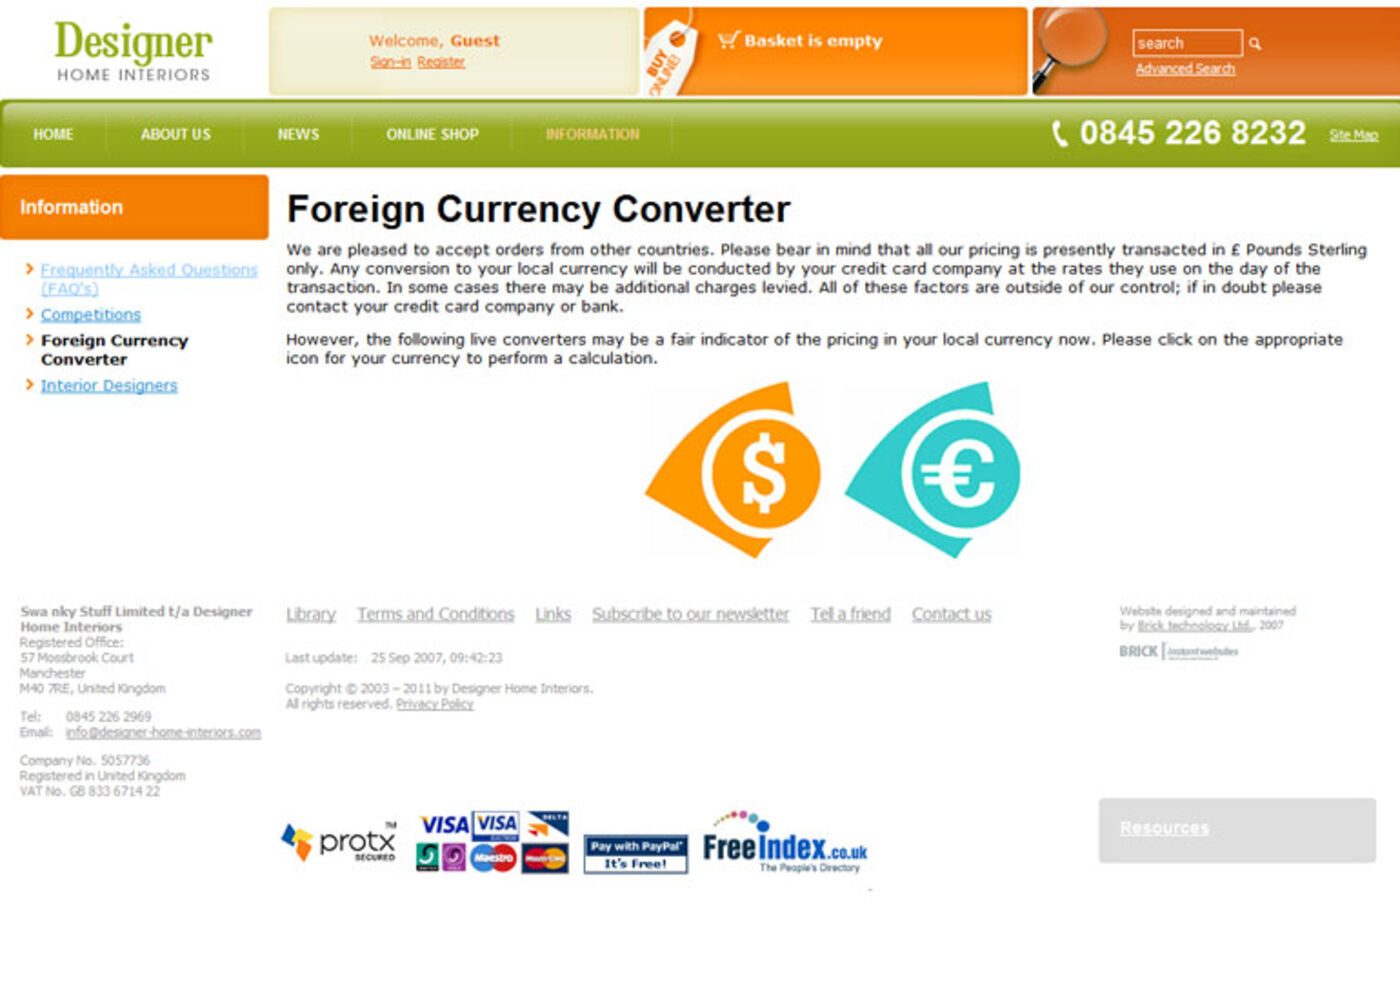 Designer Home Interiors Foreign currency converter